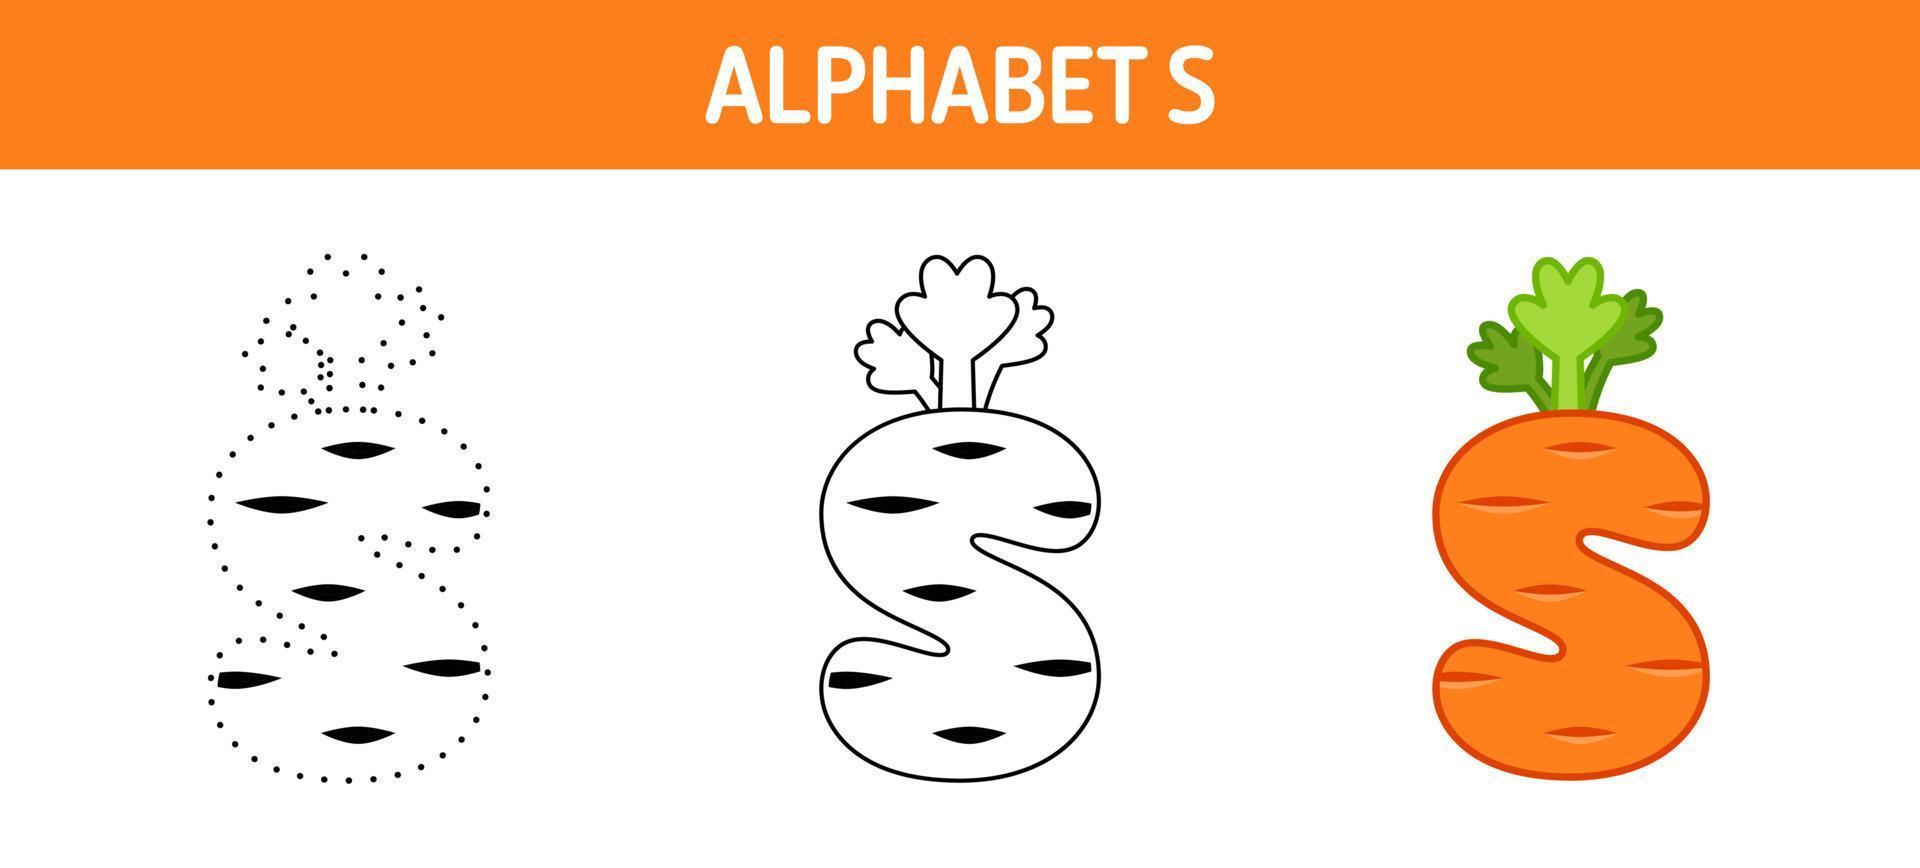 Alphabet S tracing and coloring worksheet for kids vector